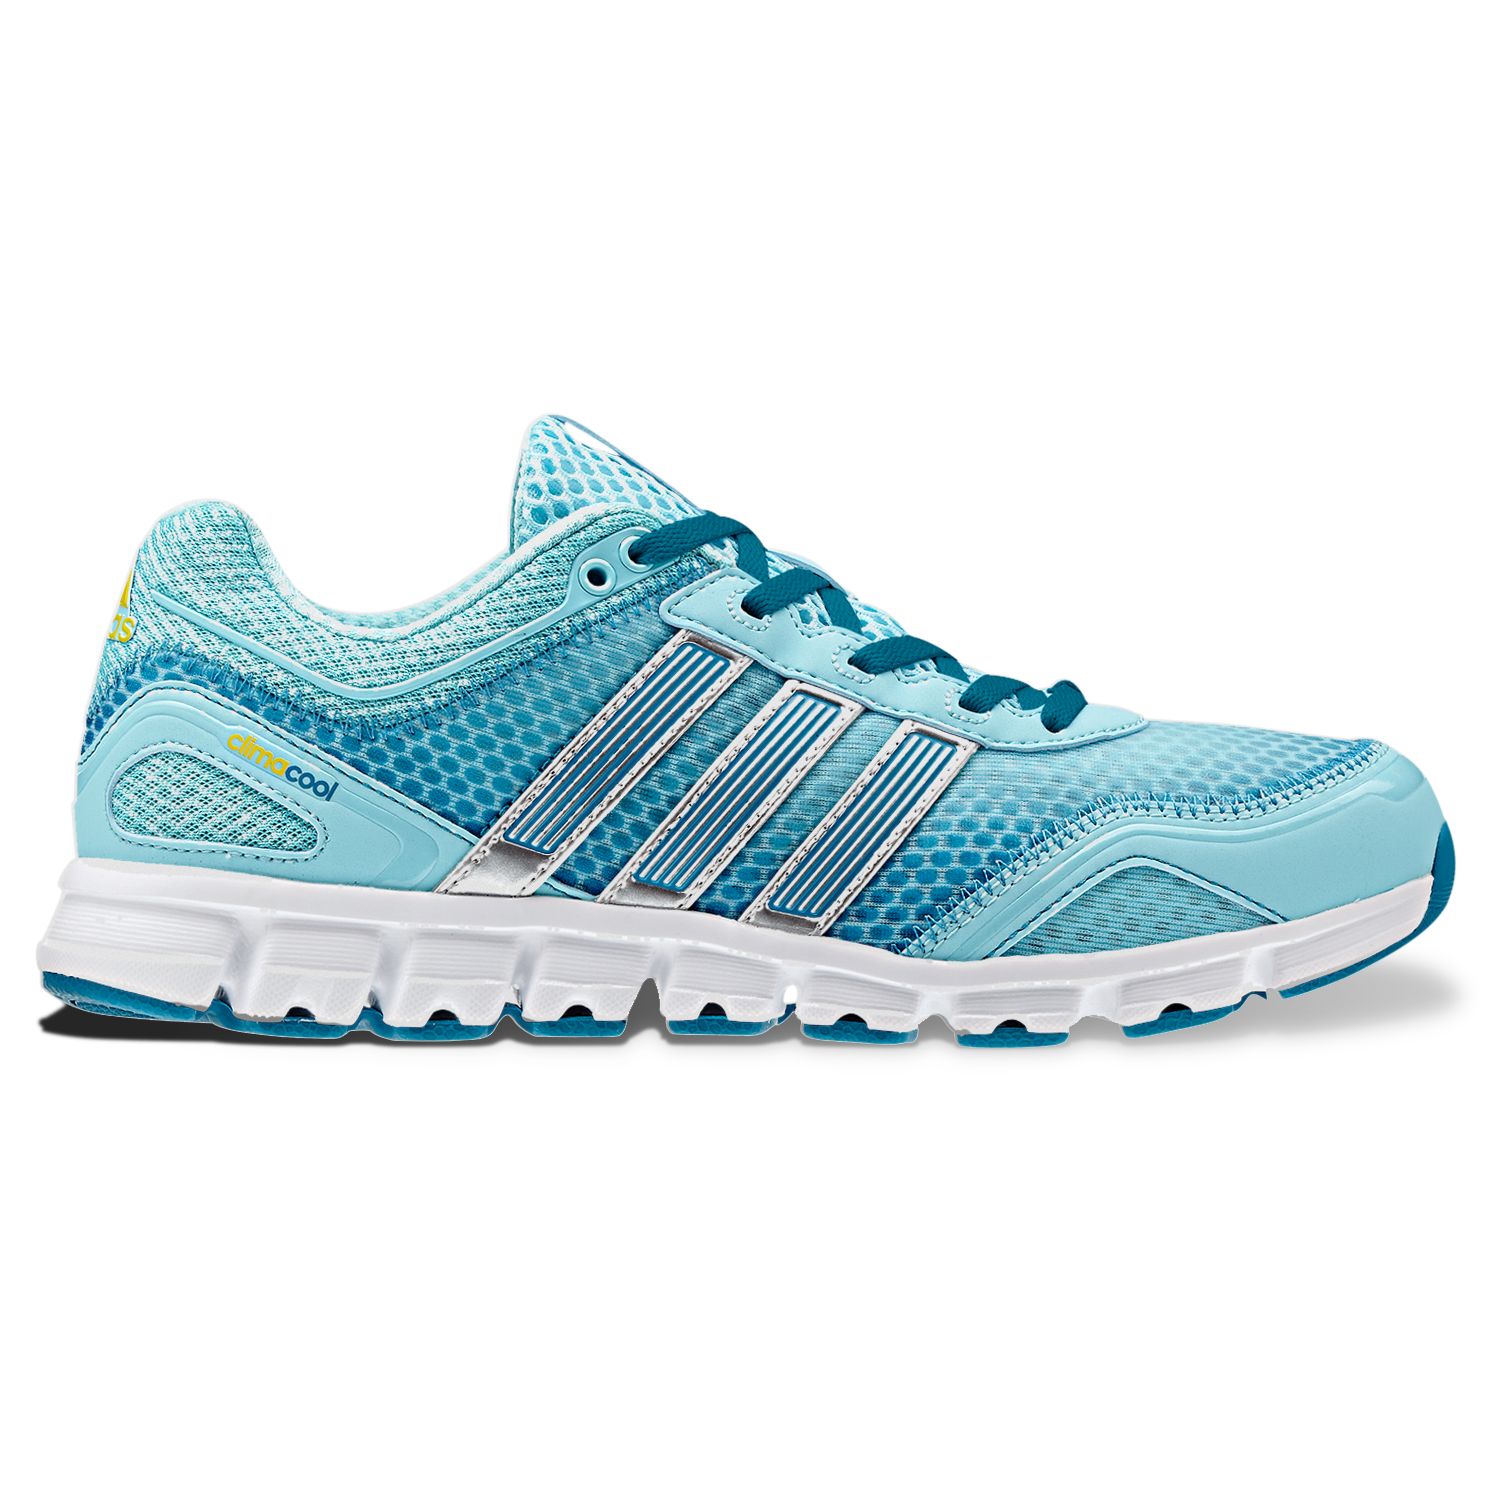 adidas climacool womens running shoes